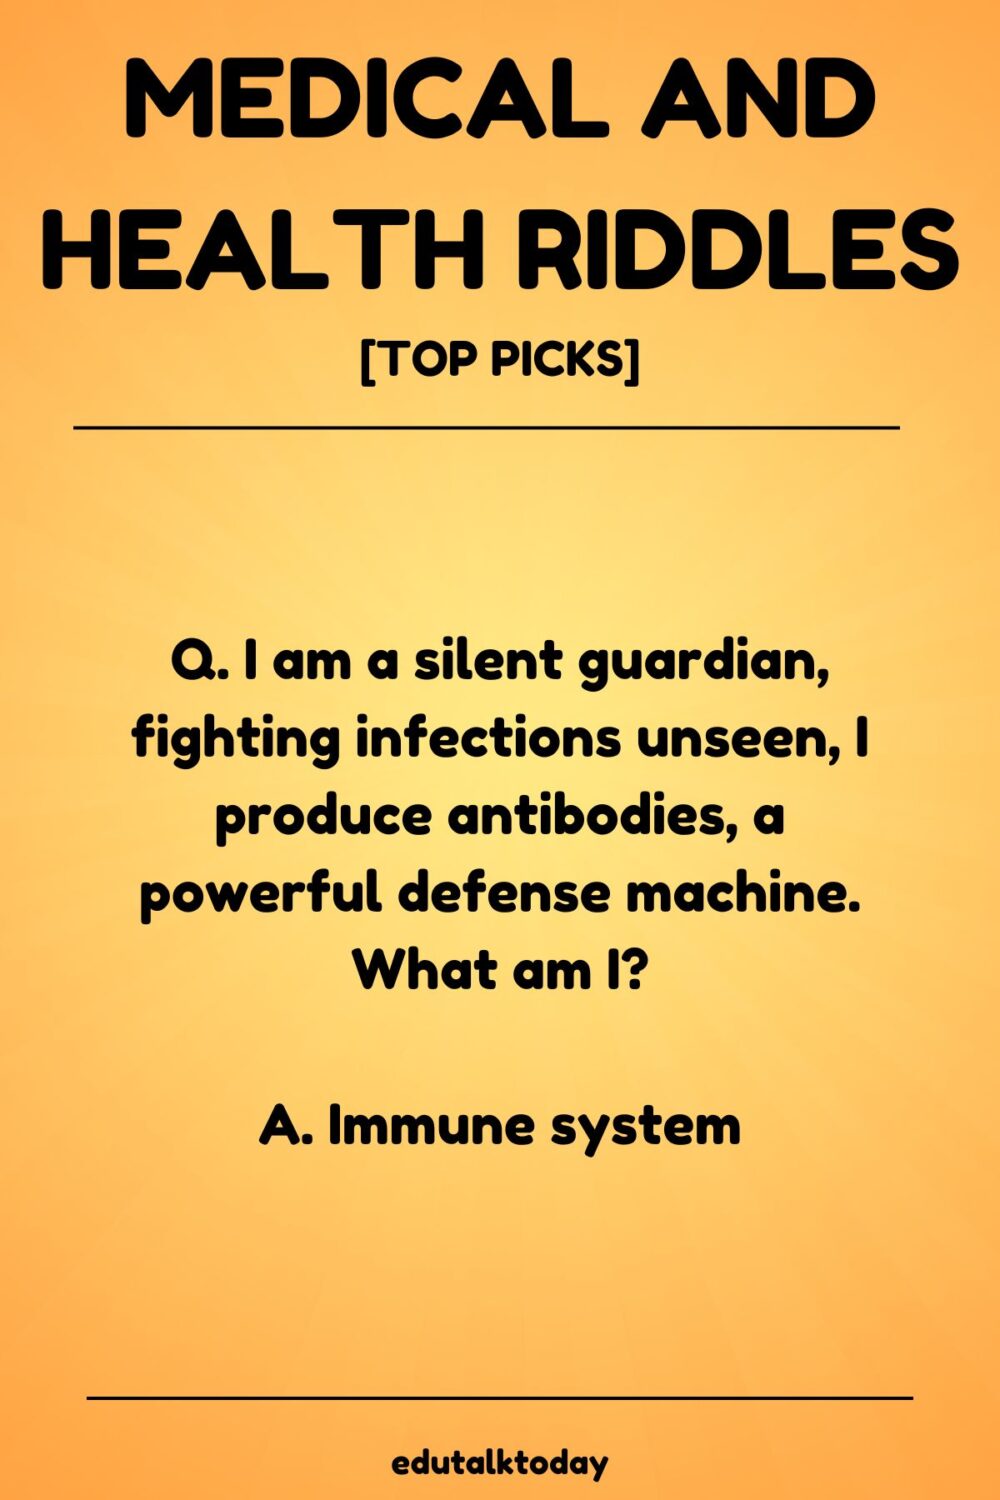 Medical and Health Riddles